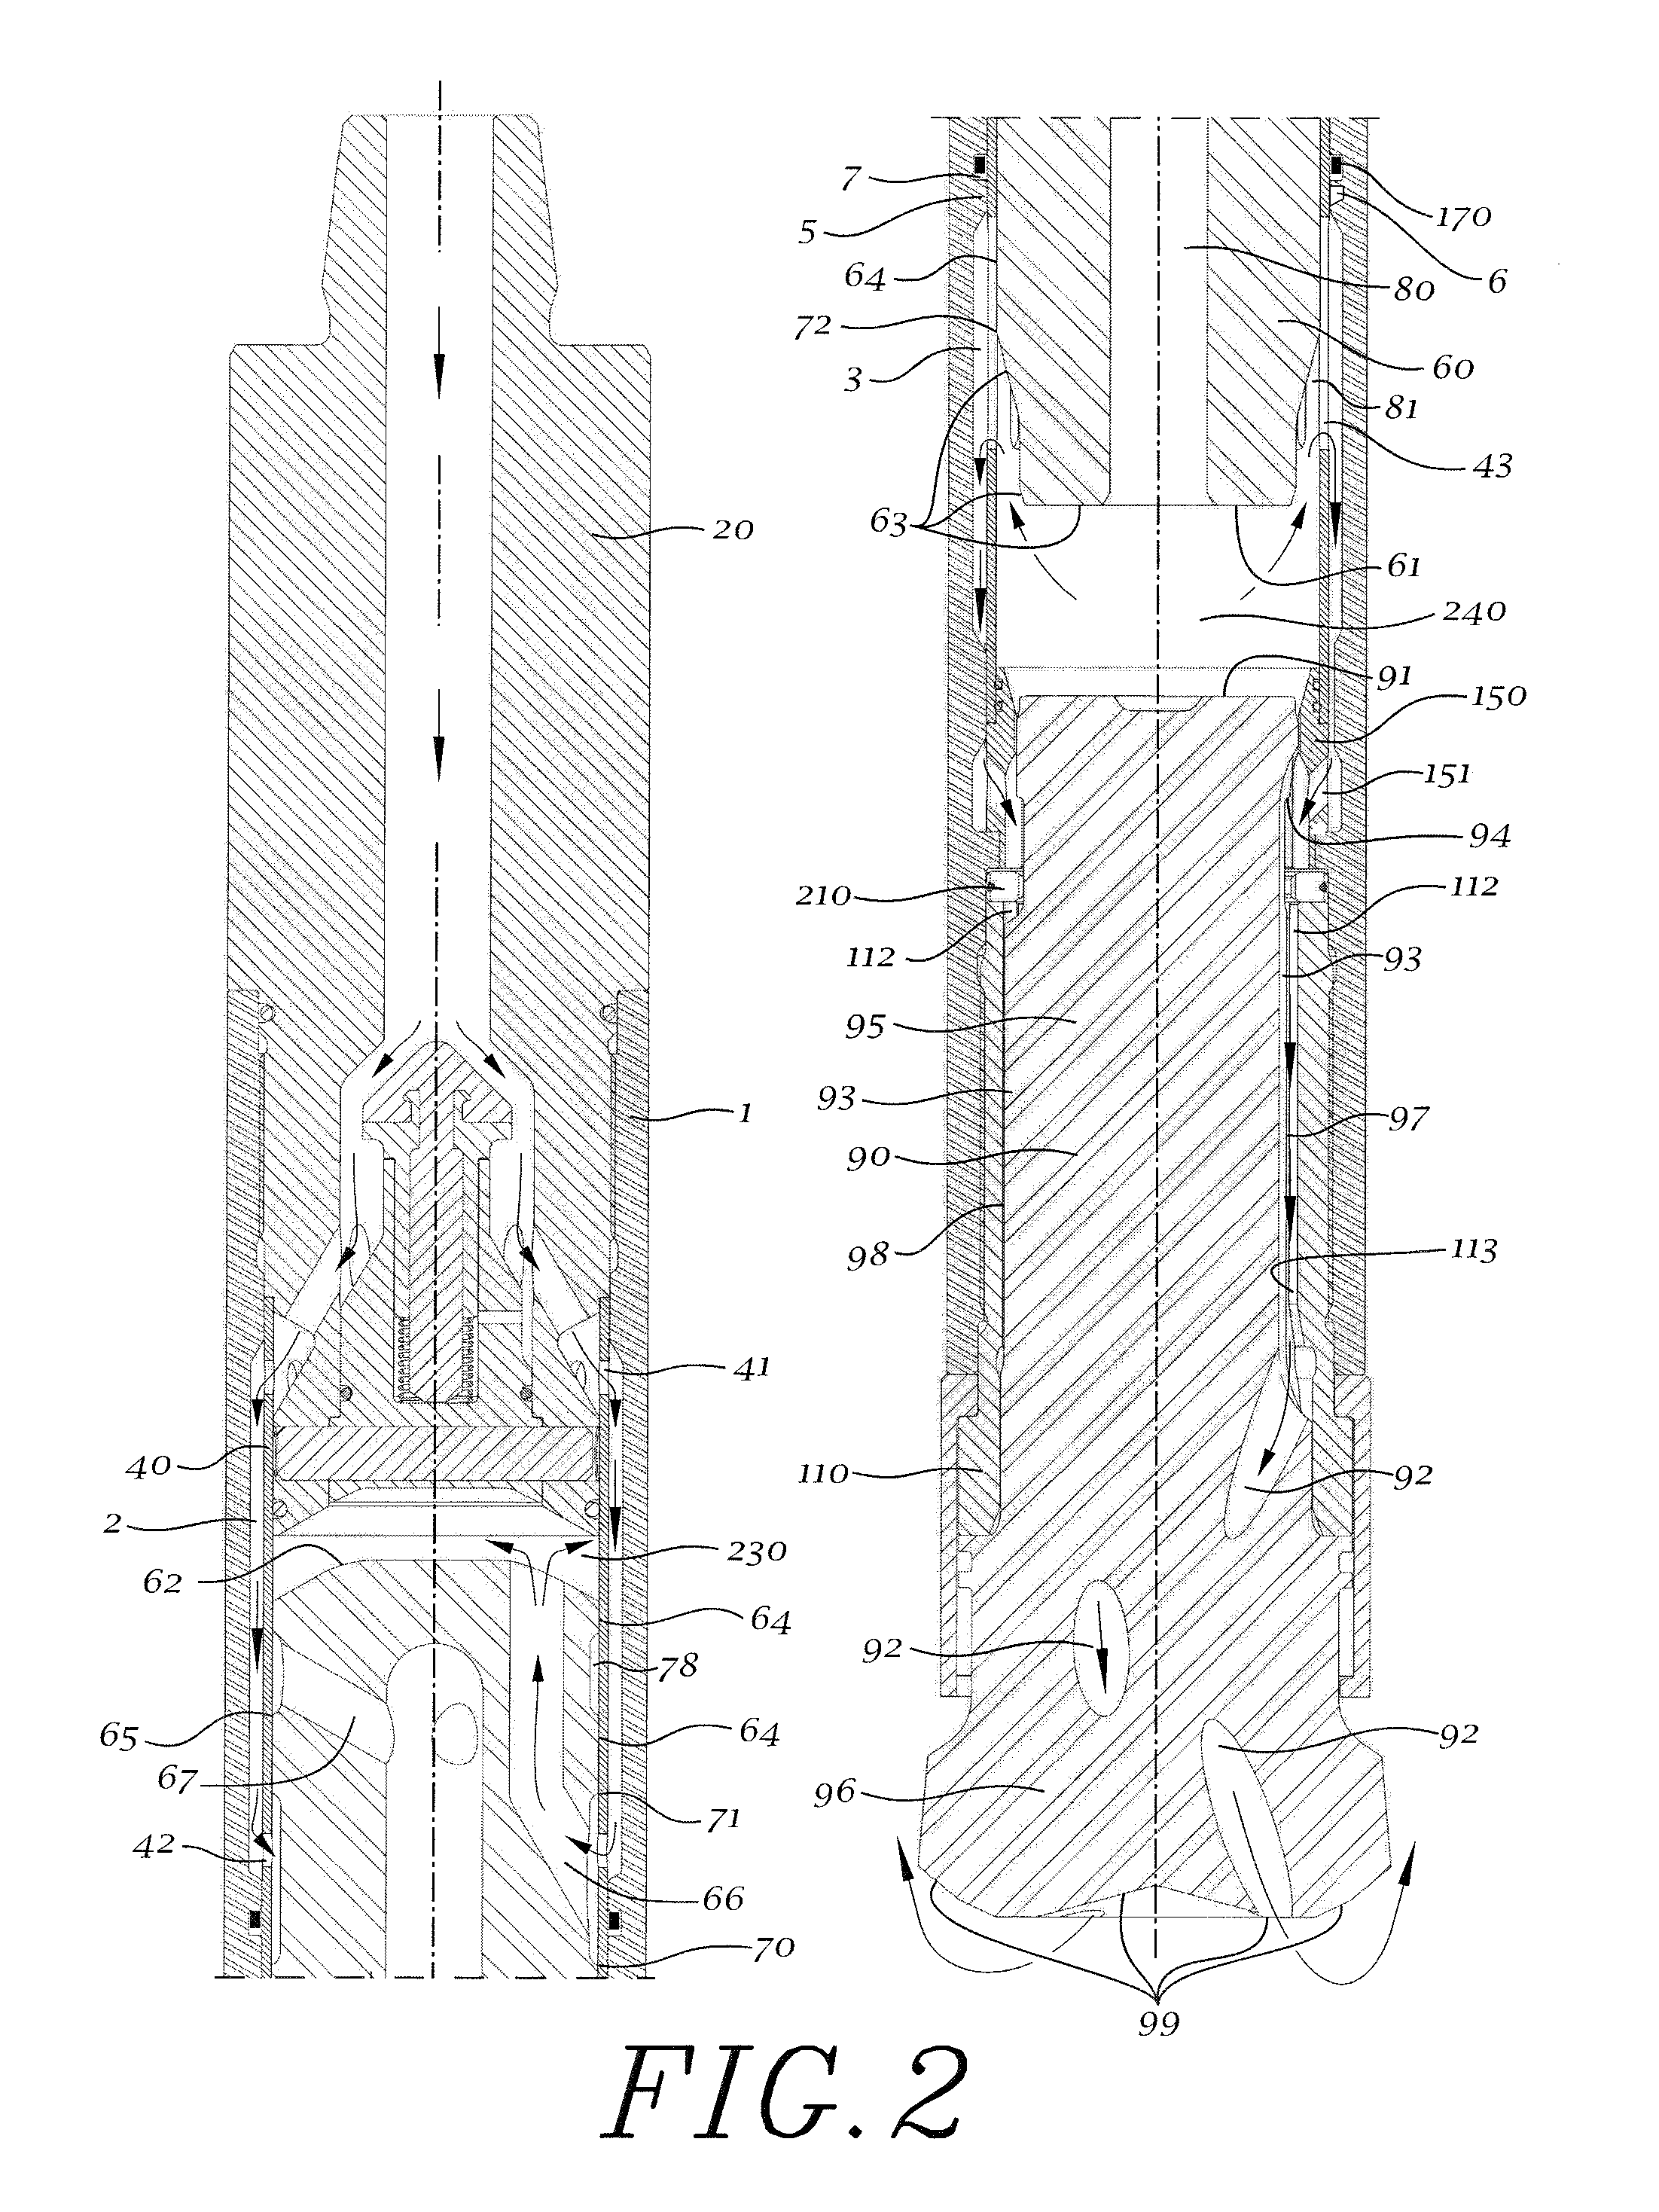 Pressurized fluid flow system for a normal circulation hammer and hammer thereof